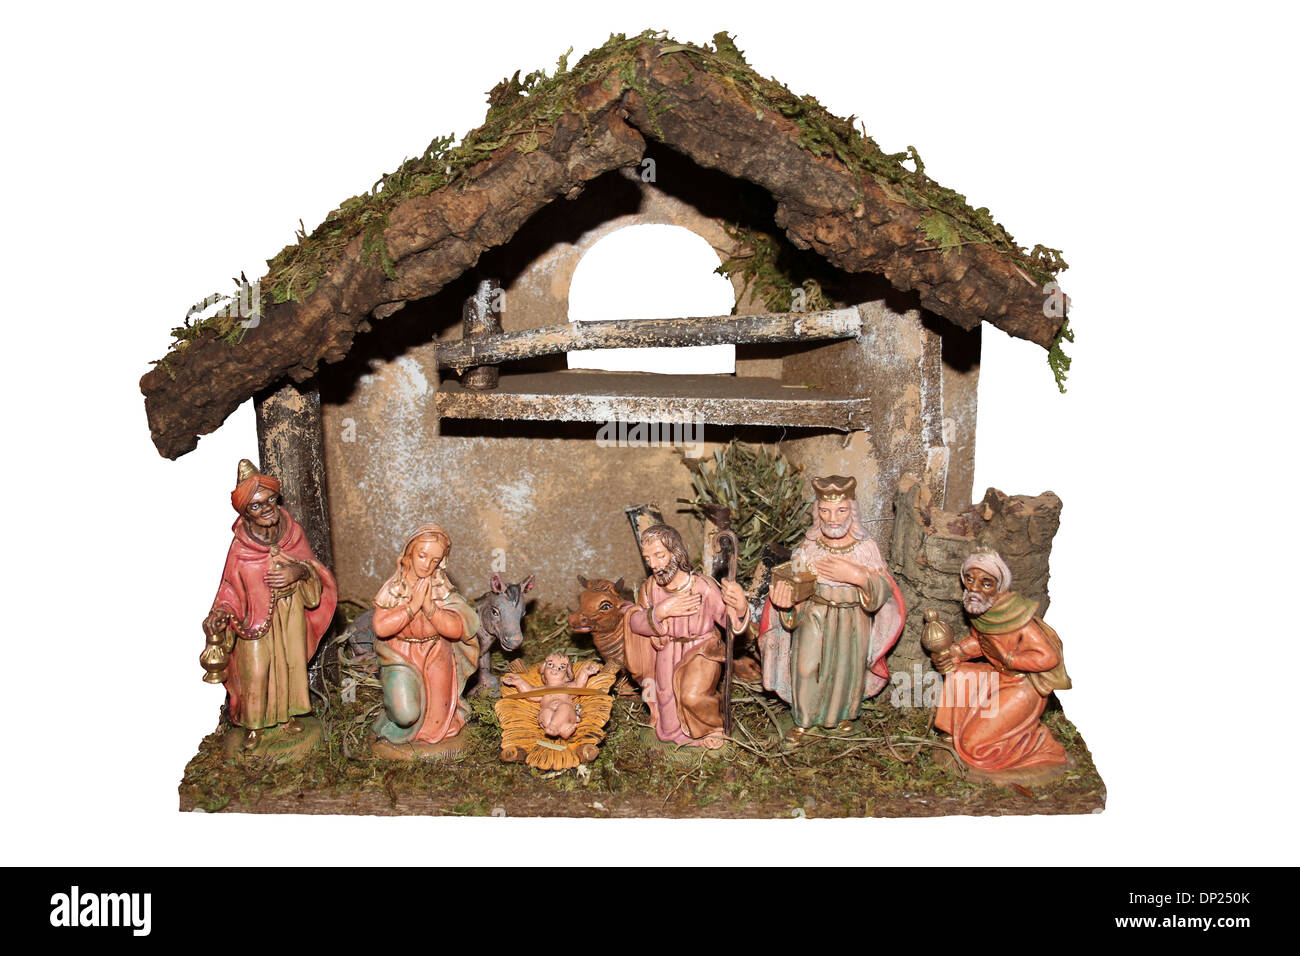 Nativity Stable Scene Cut Out Stock Photo